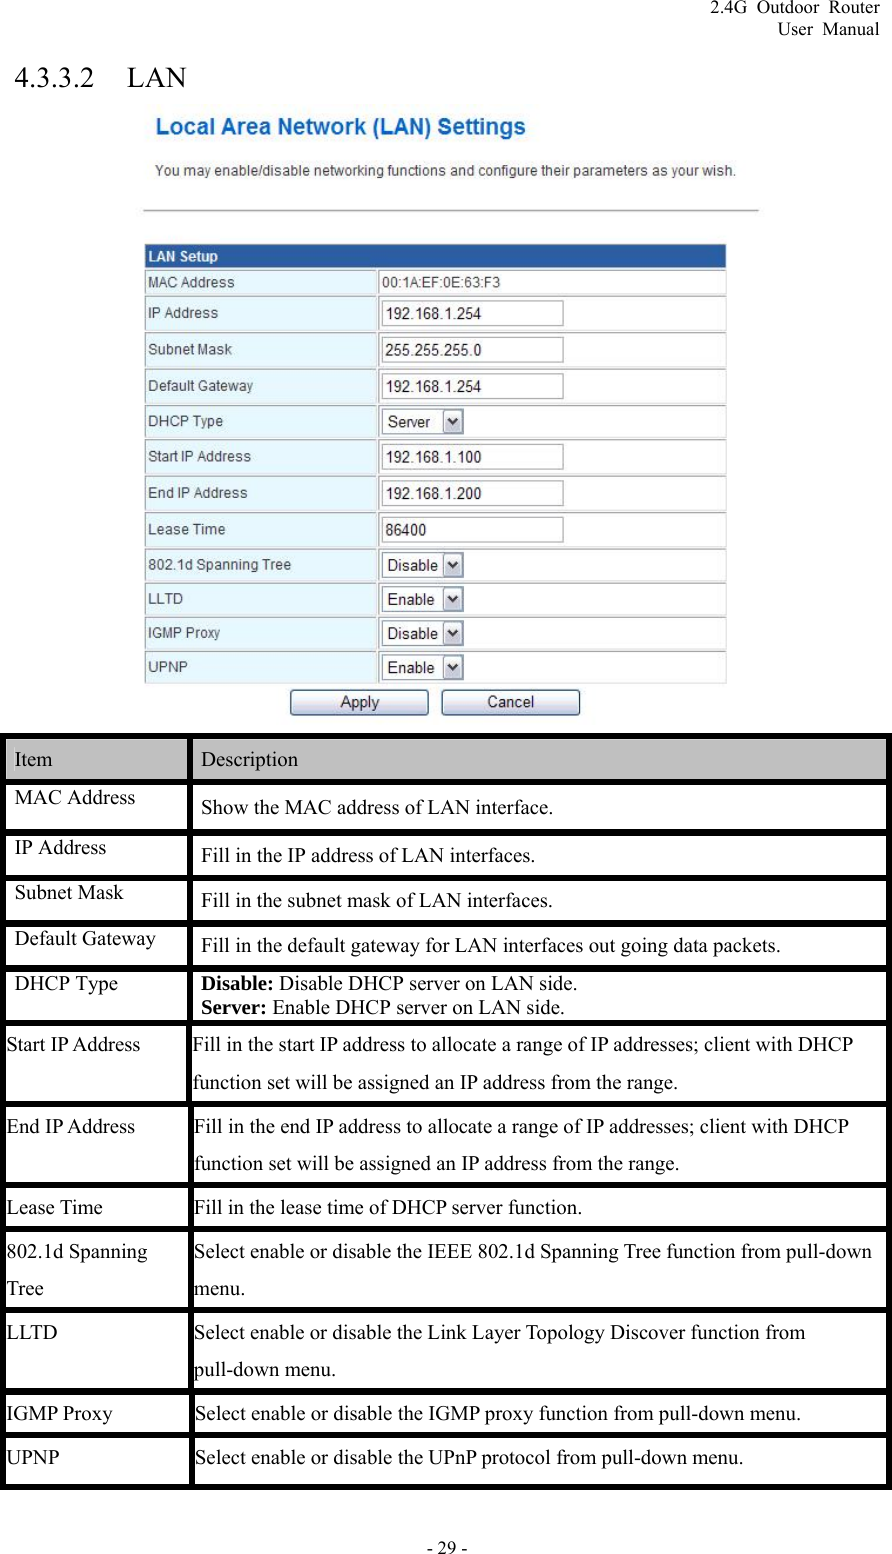 2.4G Outdoor Router User Manual 4.3.3.2 LAN  Item   Description  MAC Address  Show the MAC address of LAN interface. IP Address  Fill in the IP address of LAN interfaces. Subnet Mask  Fill in the subnet mask of LAN interfaces. Default Gateway  Fill in the default gateway for LAN interfaces out going data packets. DHCP Type  Disable: Disable DHCP server on LAN side. Server: Enable DHCP server on LAN side. Start IP Address  Fill in the start IP address to allocate a range of IP addresses; client with DHCP function set will be assigned an IP address from the range. End IP Address  Fill in the end IP address to allocate a range of IP addresses; client with DHCP function set will be assigned an IP address from the range. Lease Time  Fill in the lease time of DHCP server function. 802.1d Spanning Tree Select enable or disable the IEEE 802.1d Spanning Tree function from pull-down menu. LLTD Select enable or disable the Link Layer Topology Discover function from pull-down menu. IGMP Proxy  Select enable or disable the IGMP proxy function from pull-down menu. UPNP  Select enable or disable the UPnP protocol from pull-down menu. - 29 - 